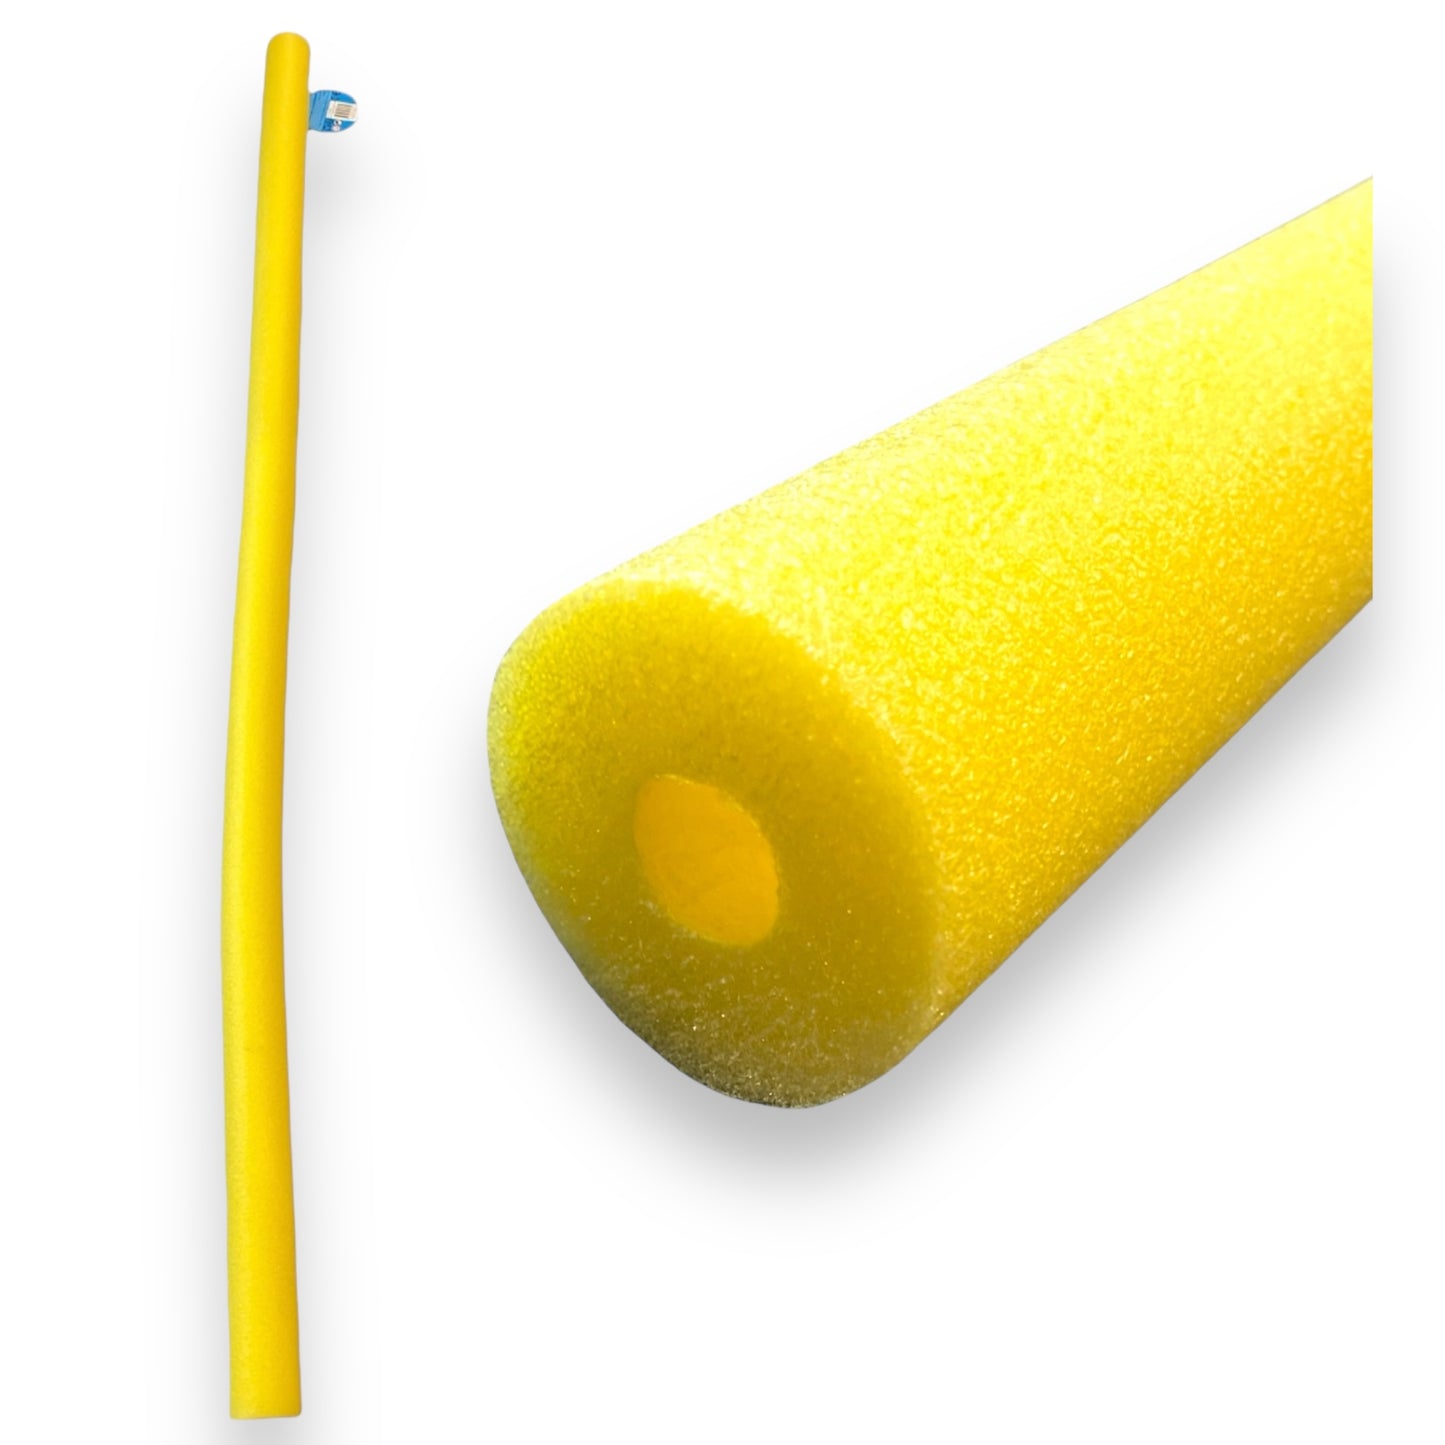 Timmy Toys - ED048 - Pool Swimming Noodle - 155cm - 4 Colours